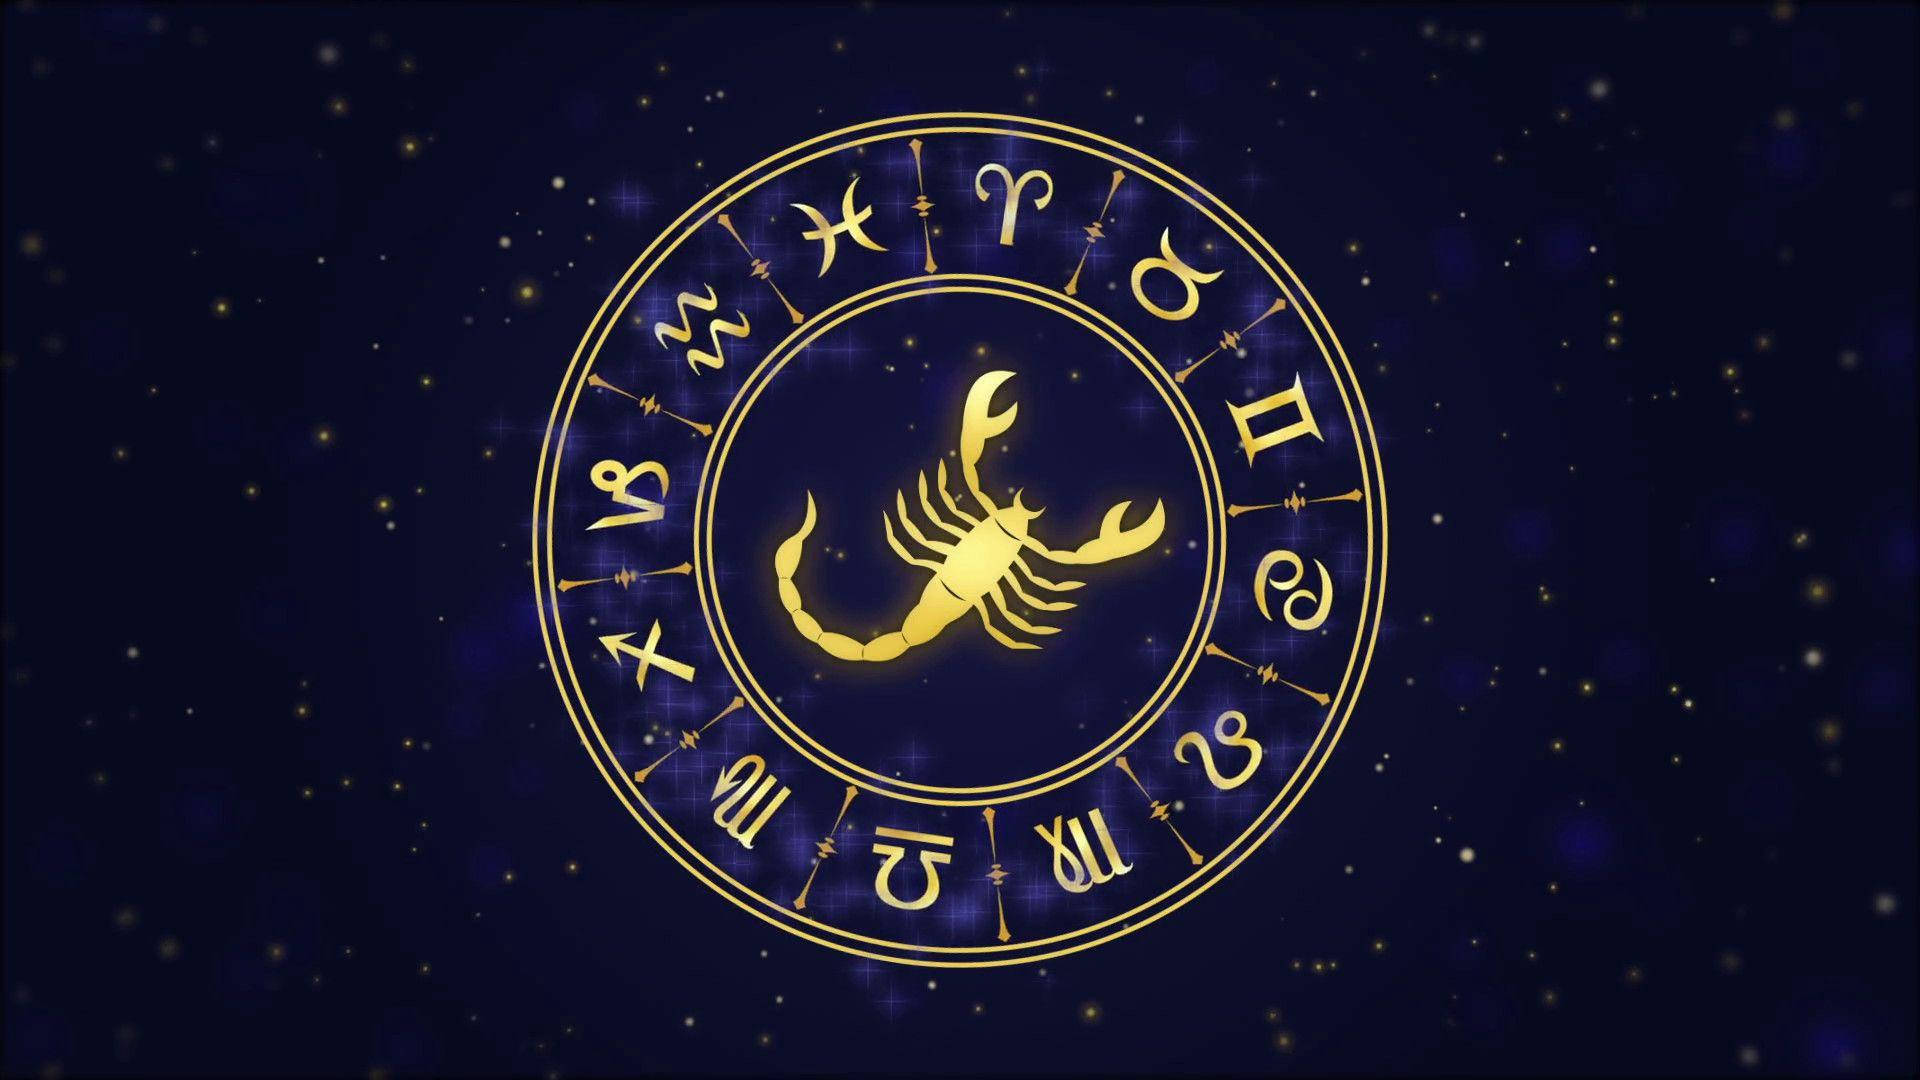 Scorpio And Astrological Signs Wallpaper